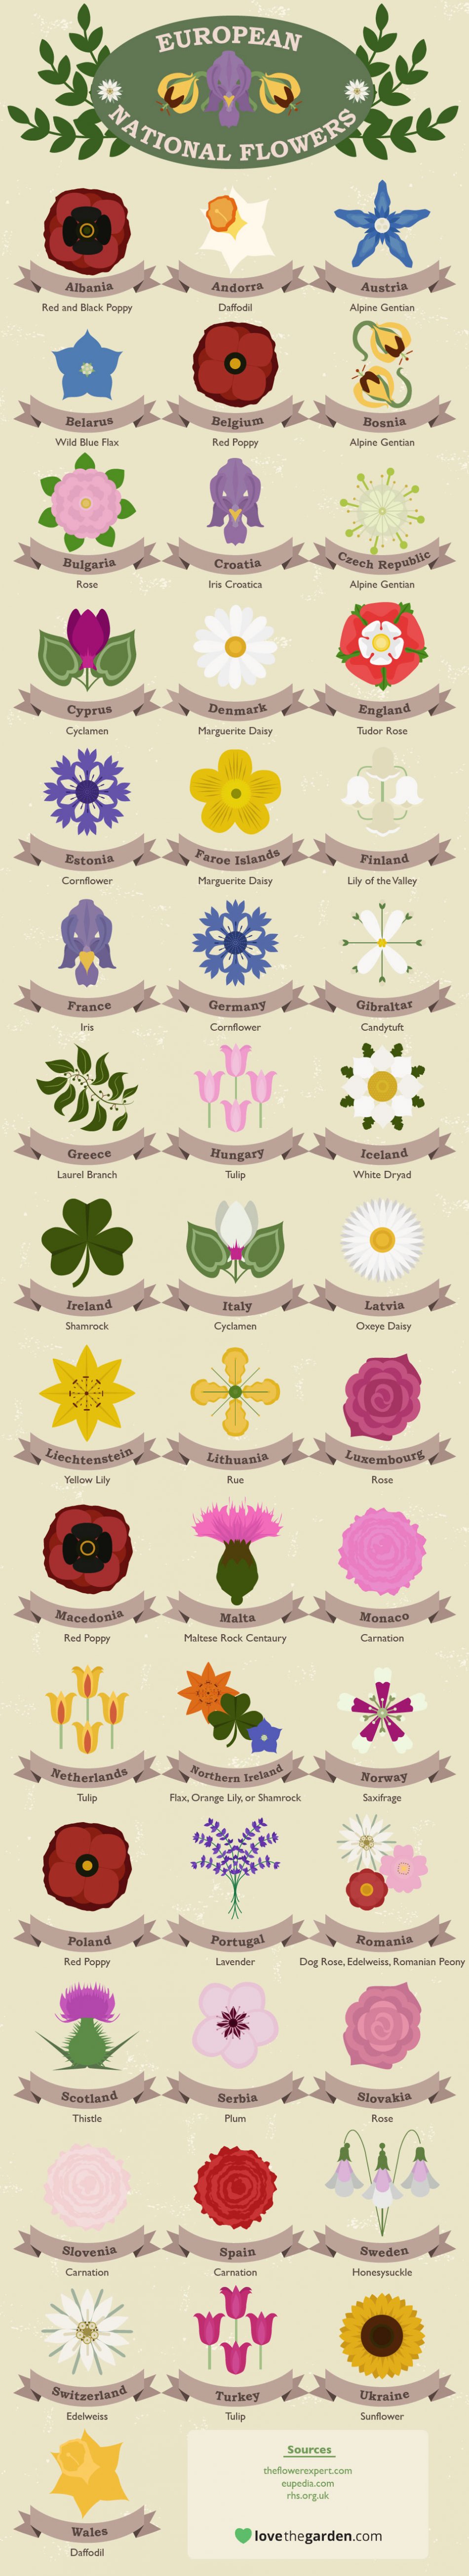 European national flowers infographic